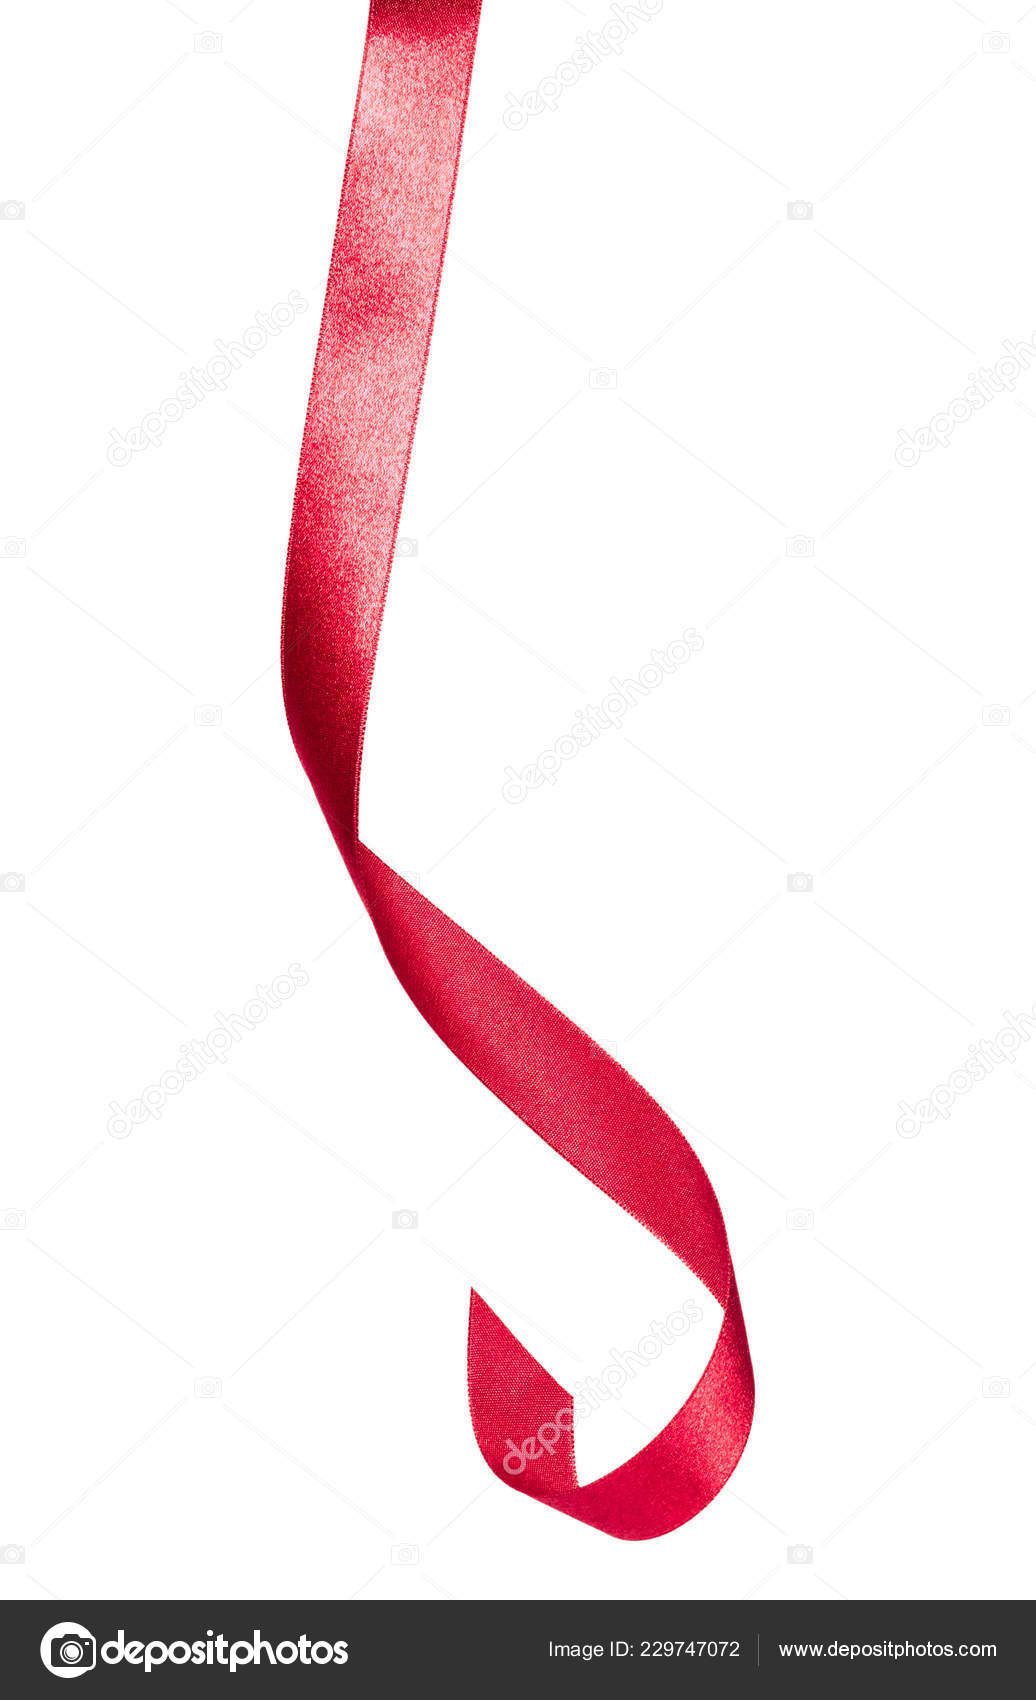 Colorful Red And White Ribbons Isolated On White Stock Photo